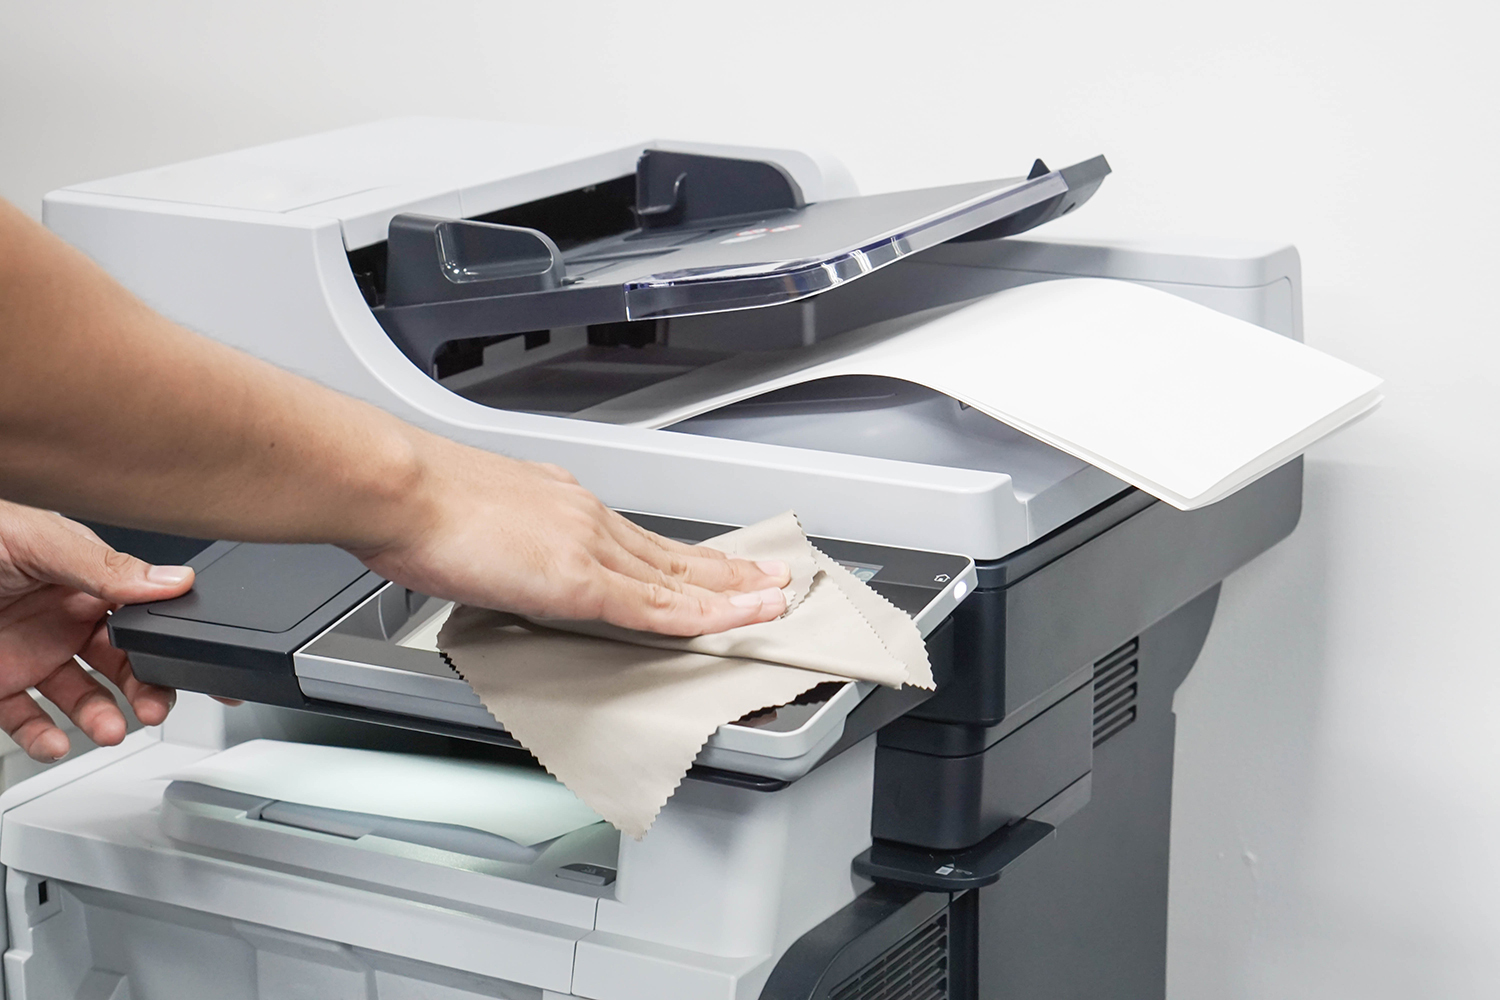 Top 5 Most Uncommon Printer Uses